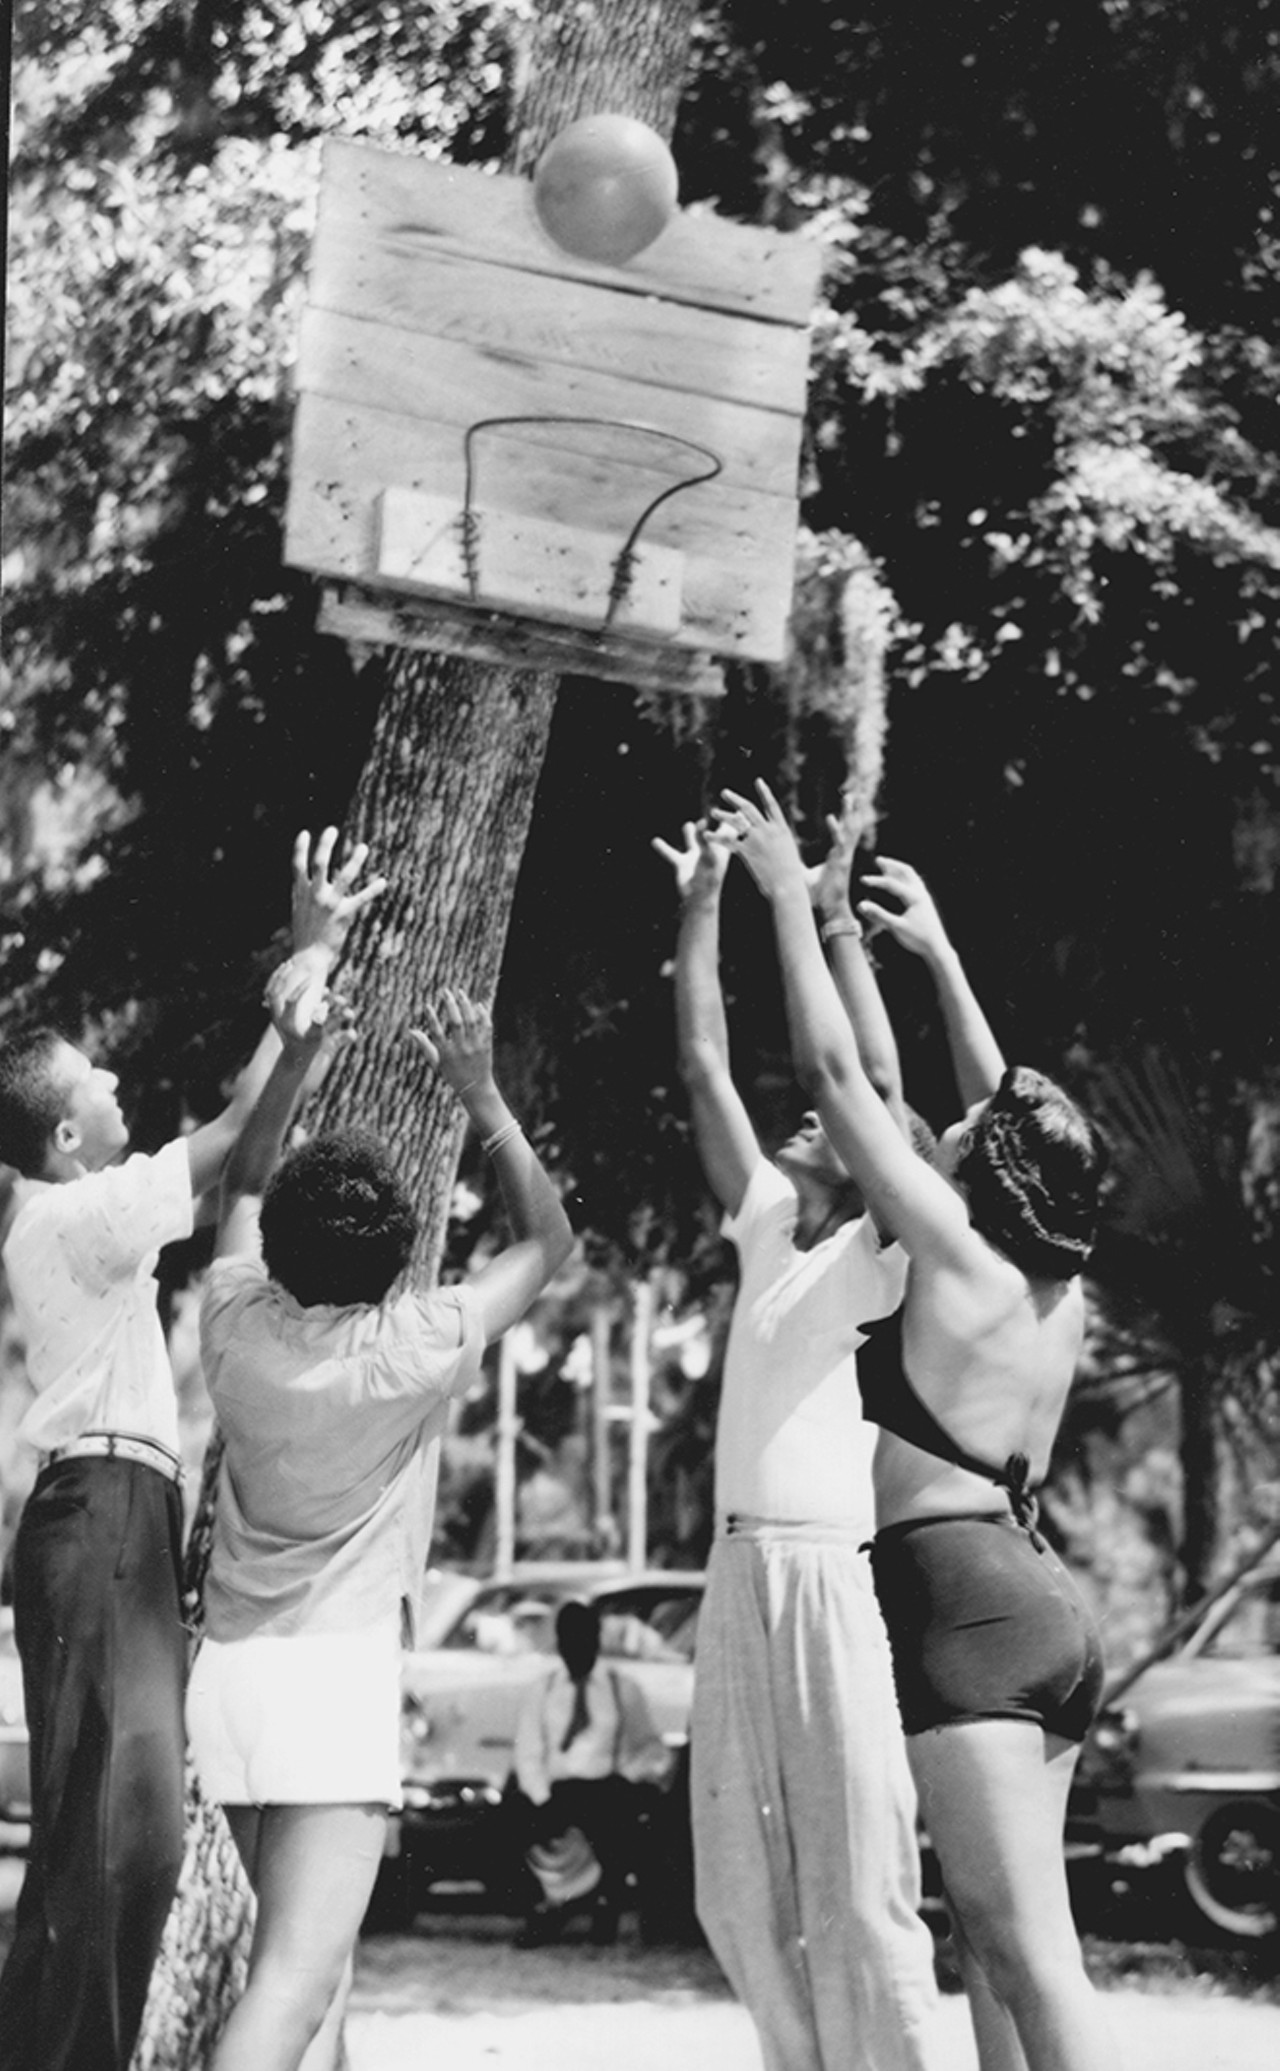 Basketball was a popular pastime for young men and women who visited the park. Photo by Bruce Mozert. By permission of Bruce Mozert. Courtesy of Cynthia Wilson-Graham. Reprinted with permission of the University Press of Florida.